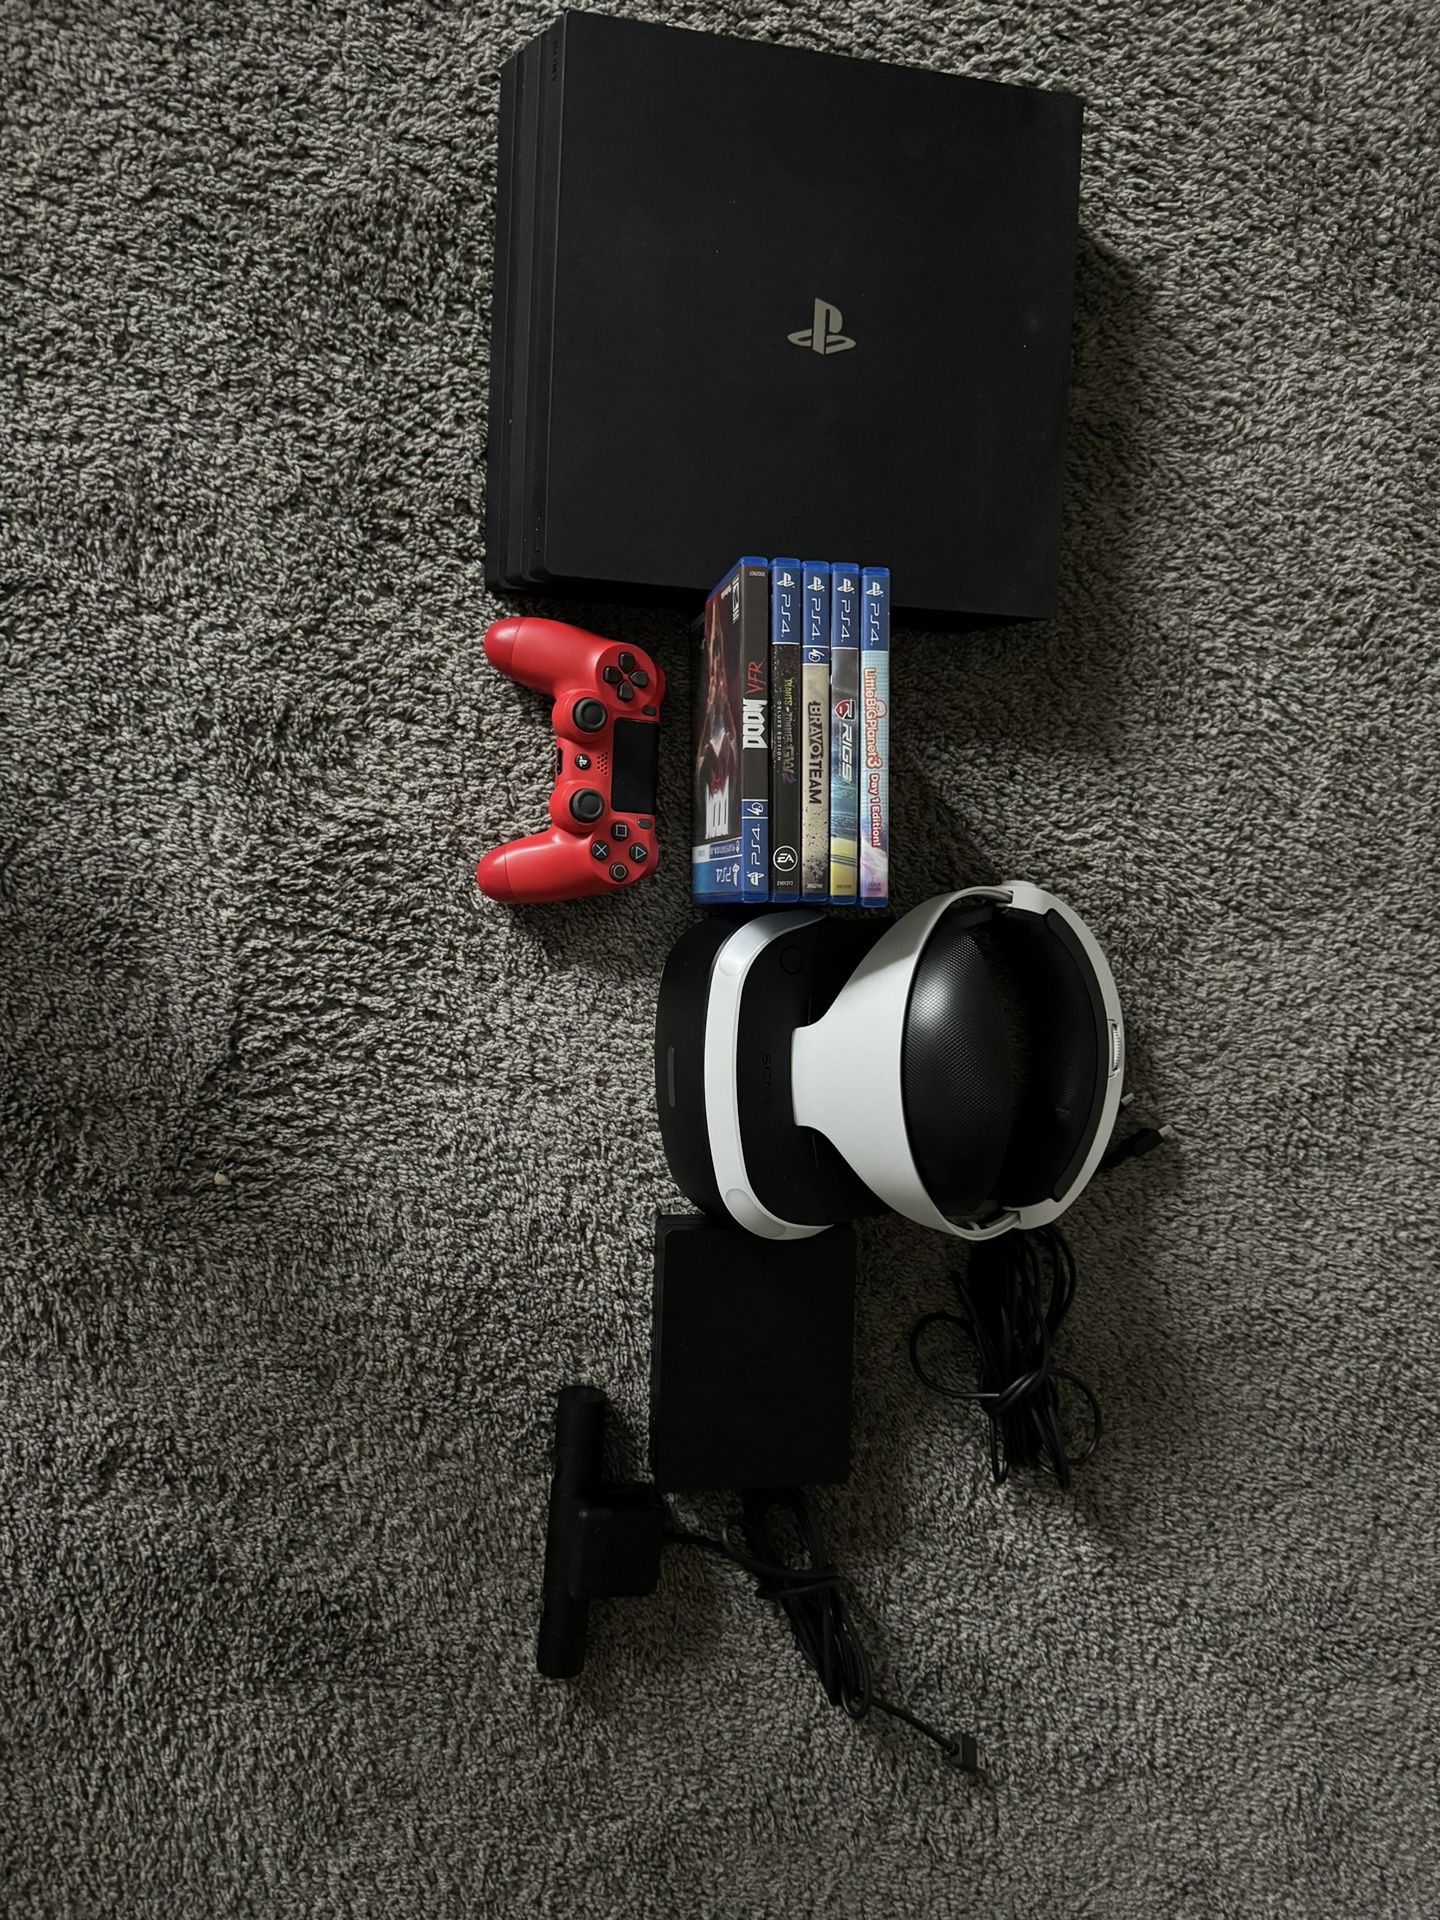 PS4 CONOLE w VR HEADSET/VR AIM CONTROLLER 